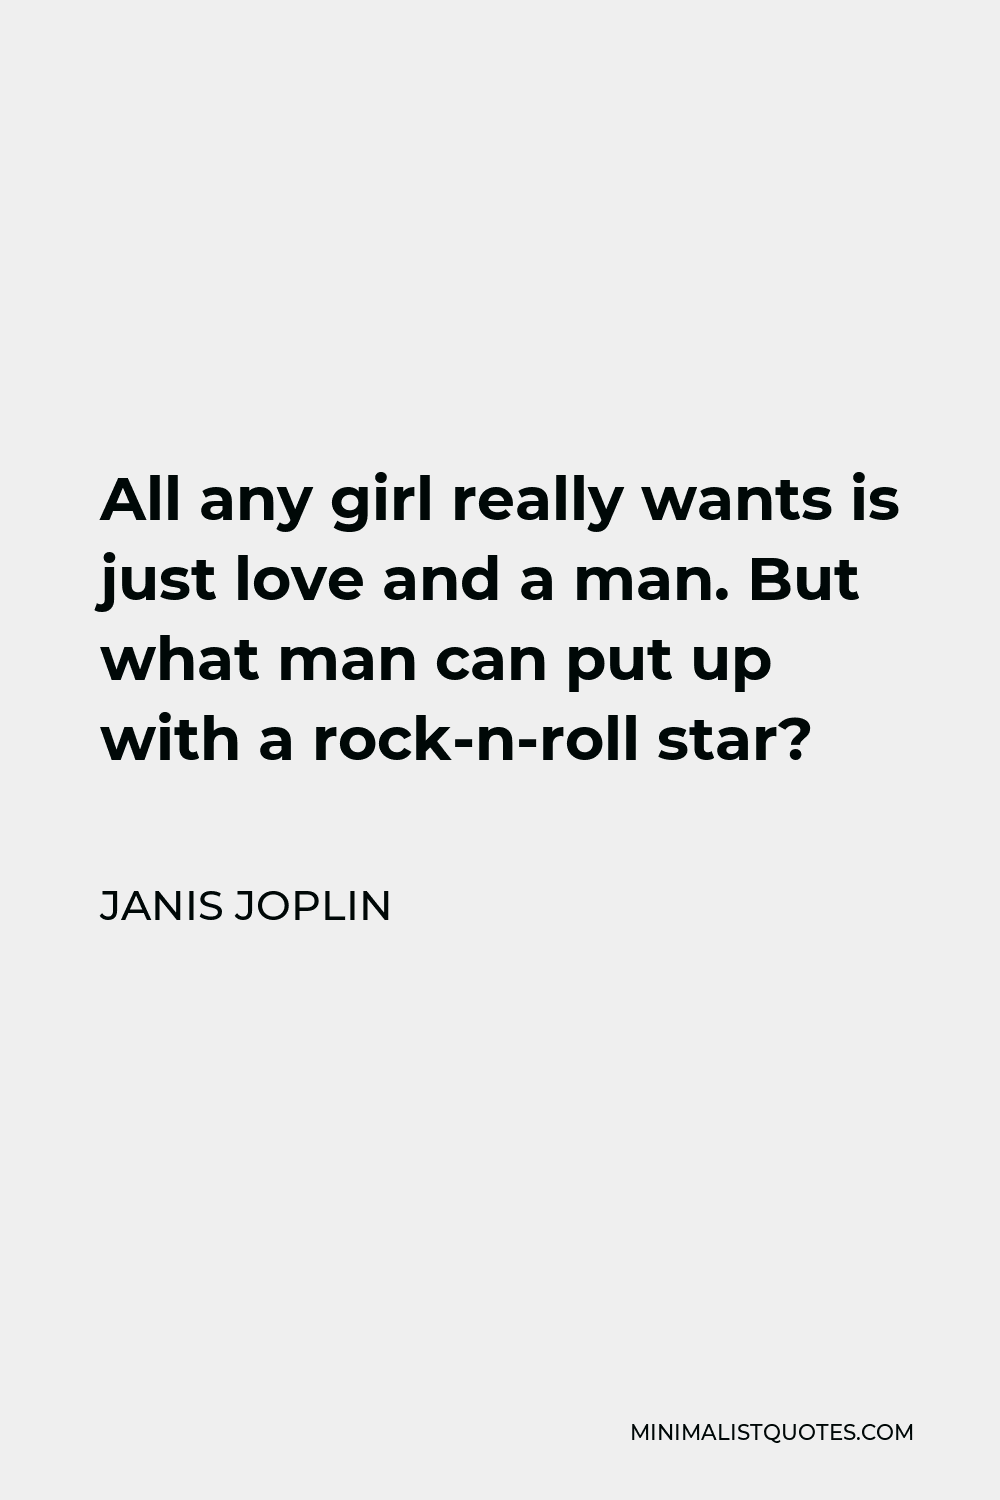 Janis Joplin Quote - All any girl really wants is just love and a man. But what man can put up with a rock-n-roll star?